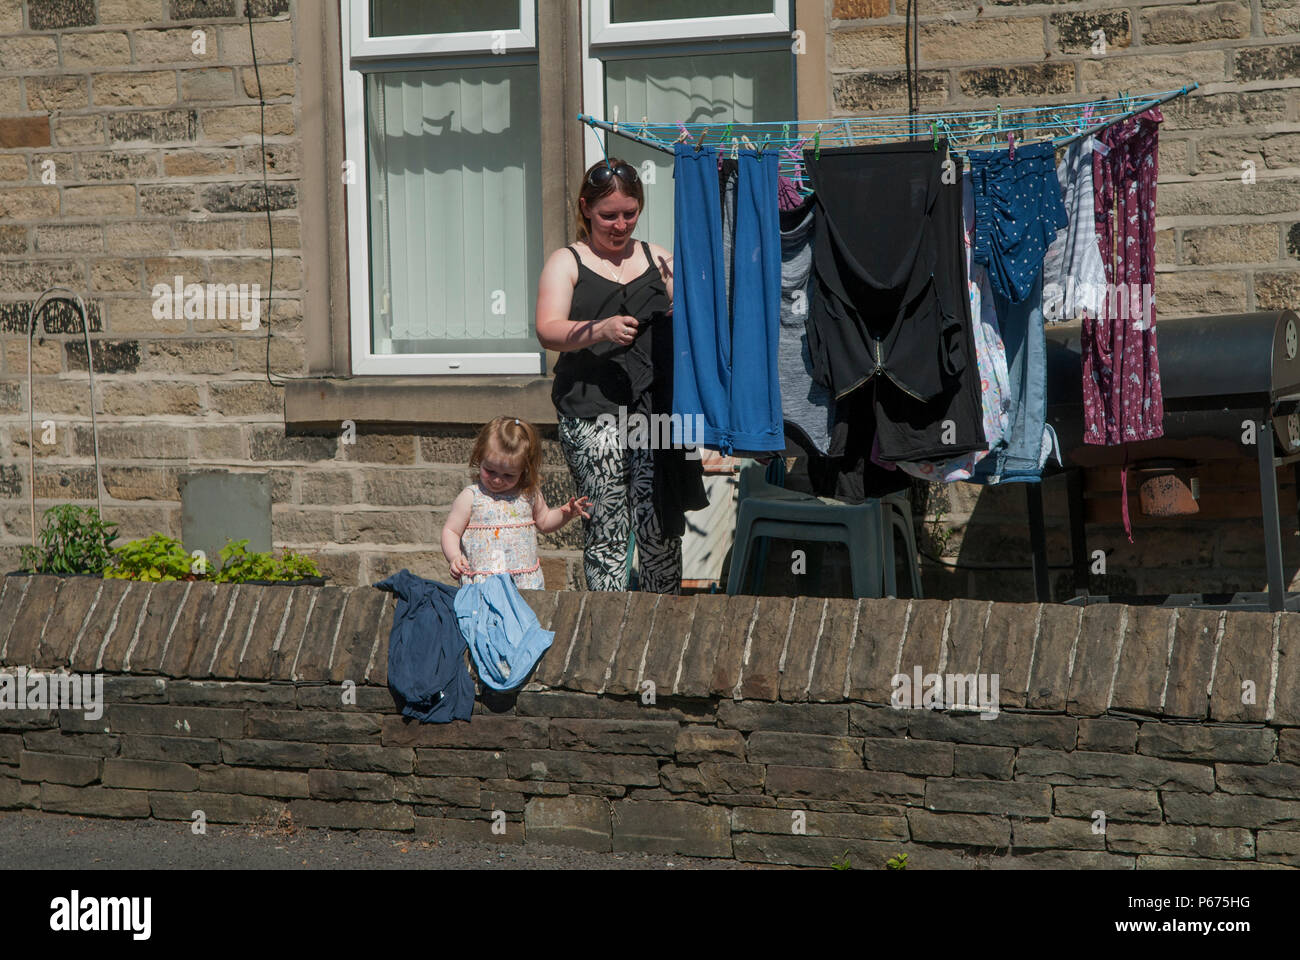 Child helping her mother with the family laundry hanging wet clothes out to dry in front garden on a clothesline. north of England 2010s UK HOMER SYKES Stock Photo